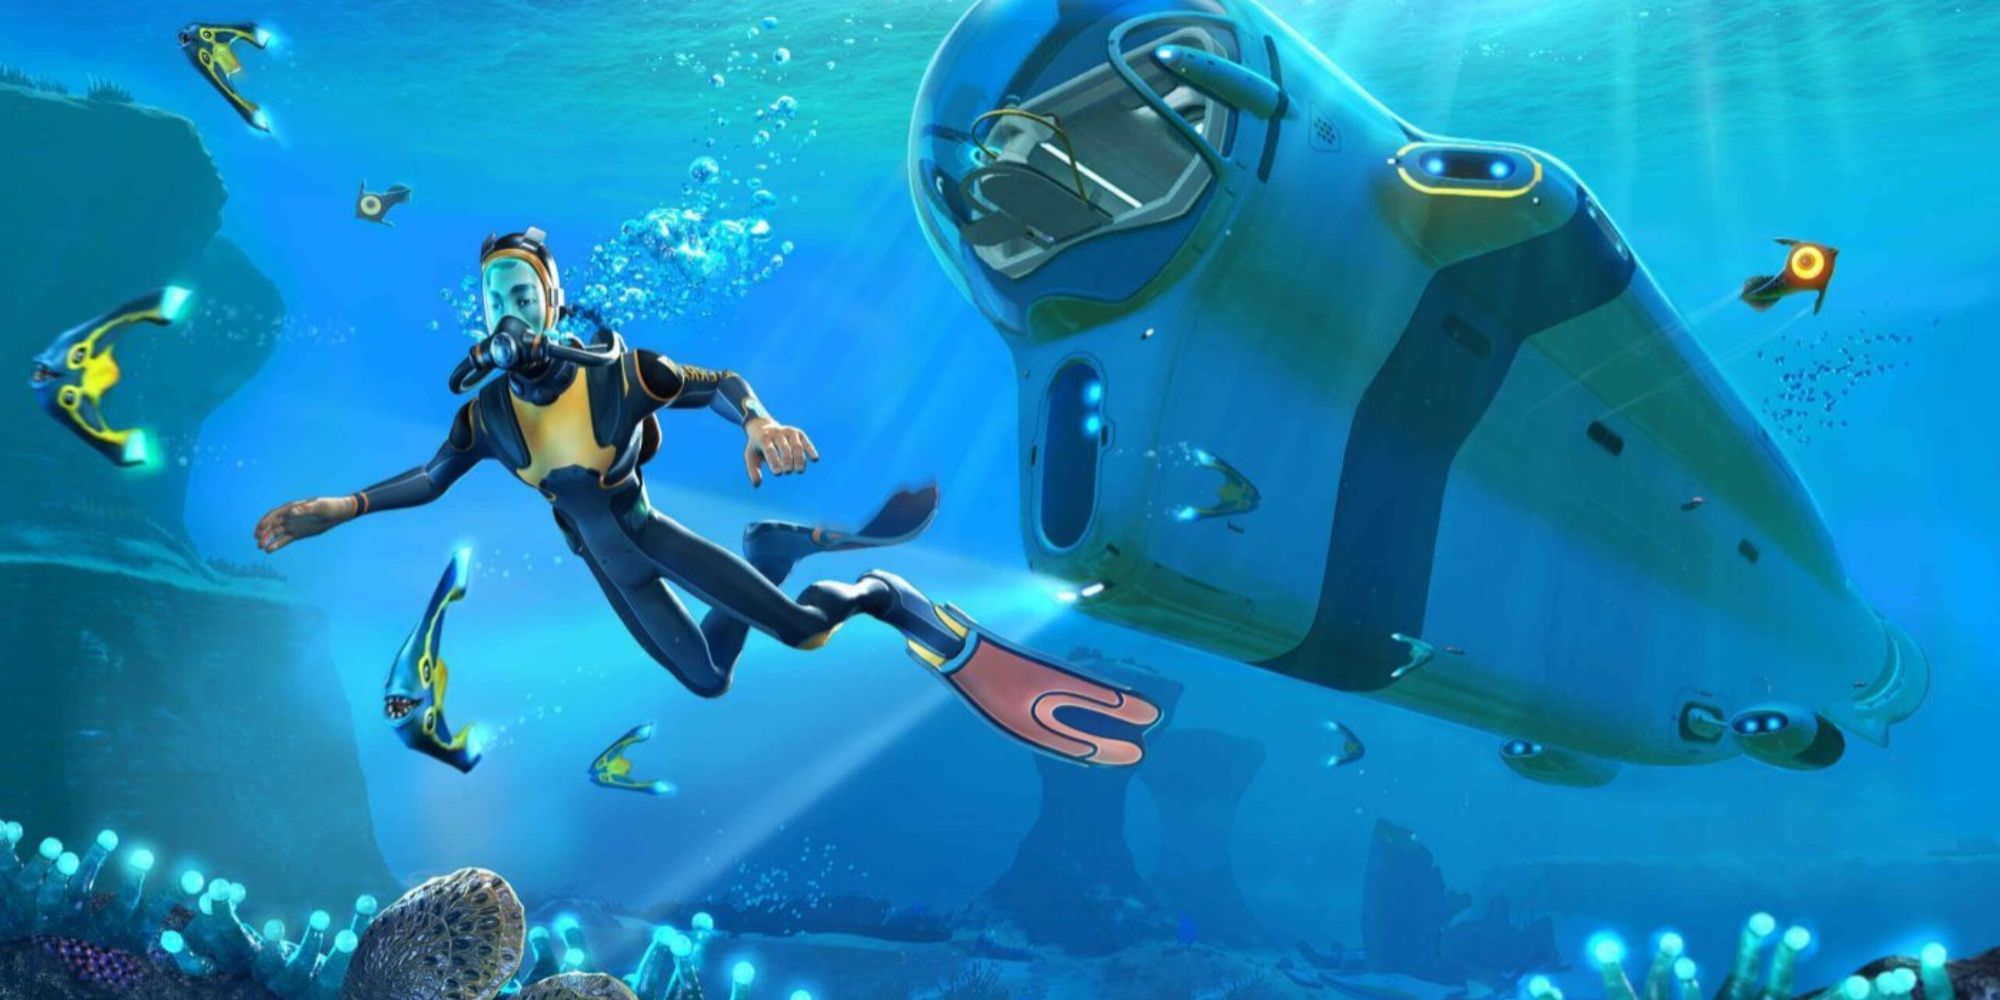 Subnautica cover with player character swimming beside Cyclops